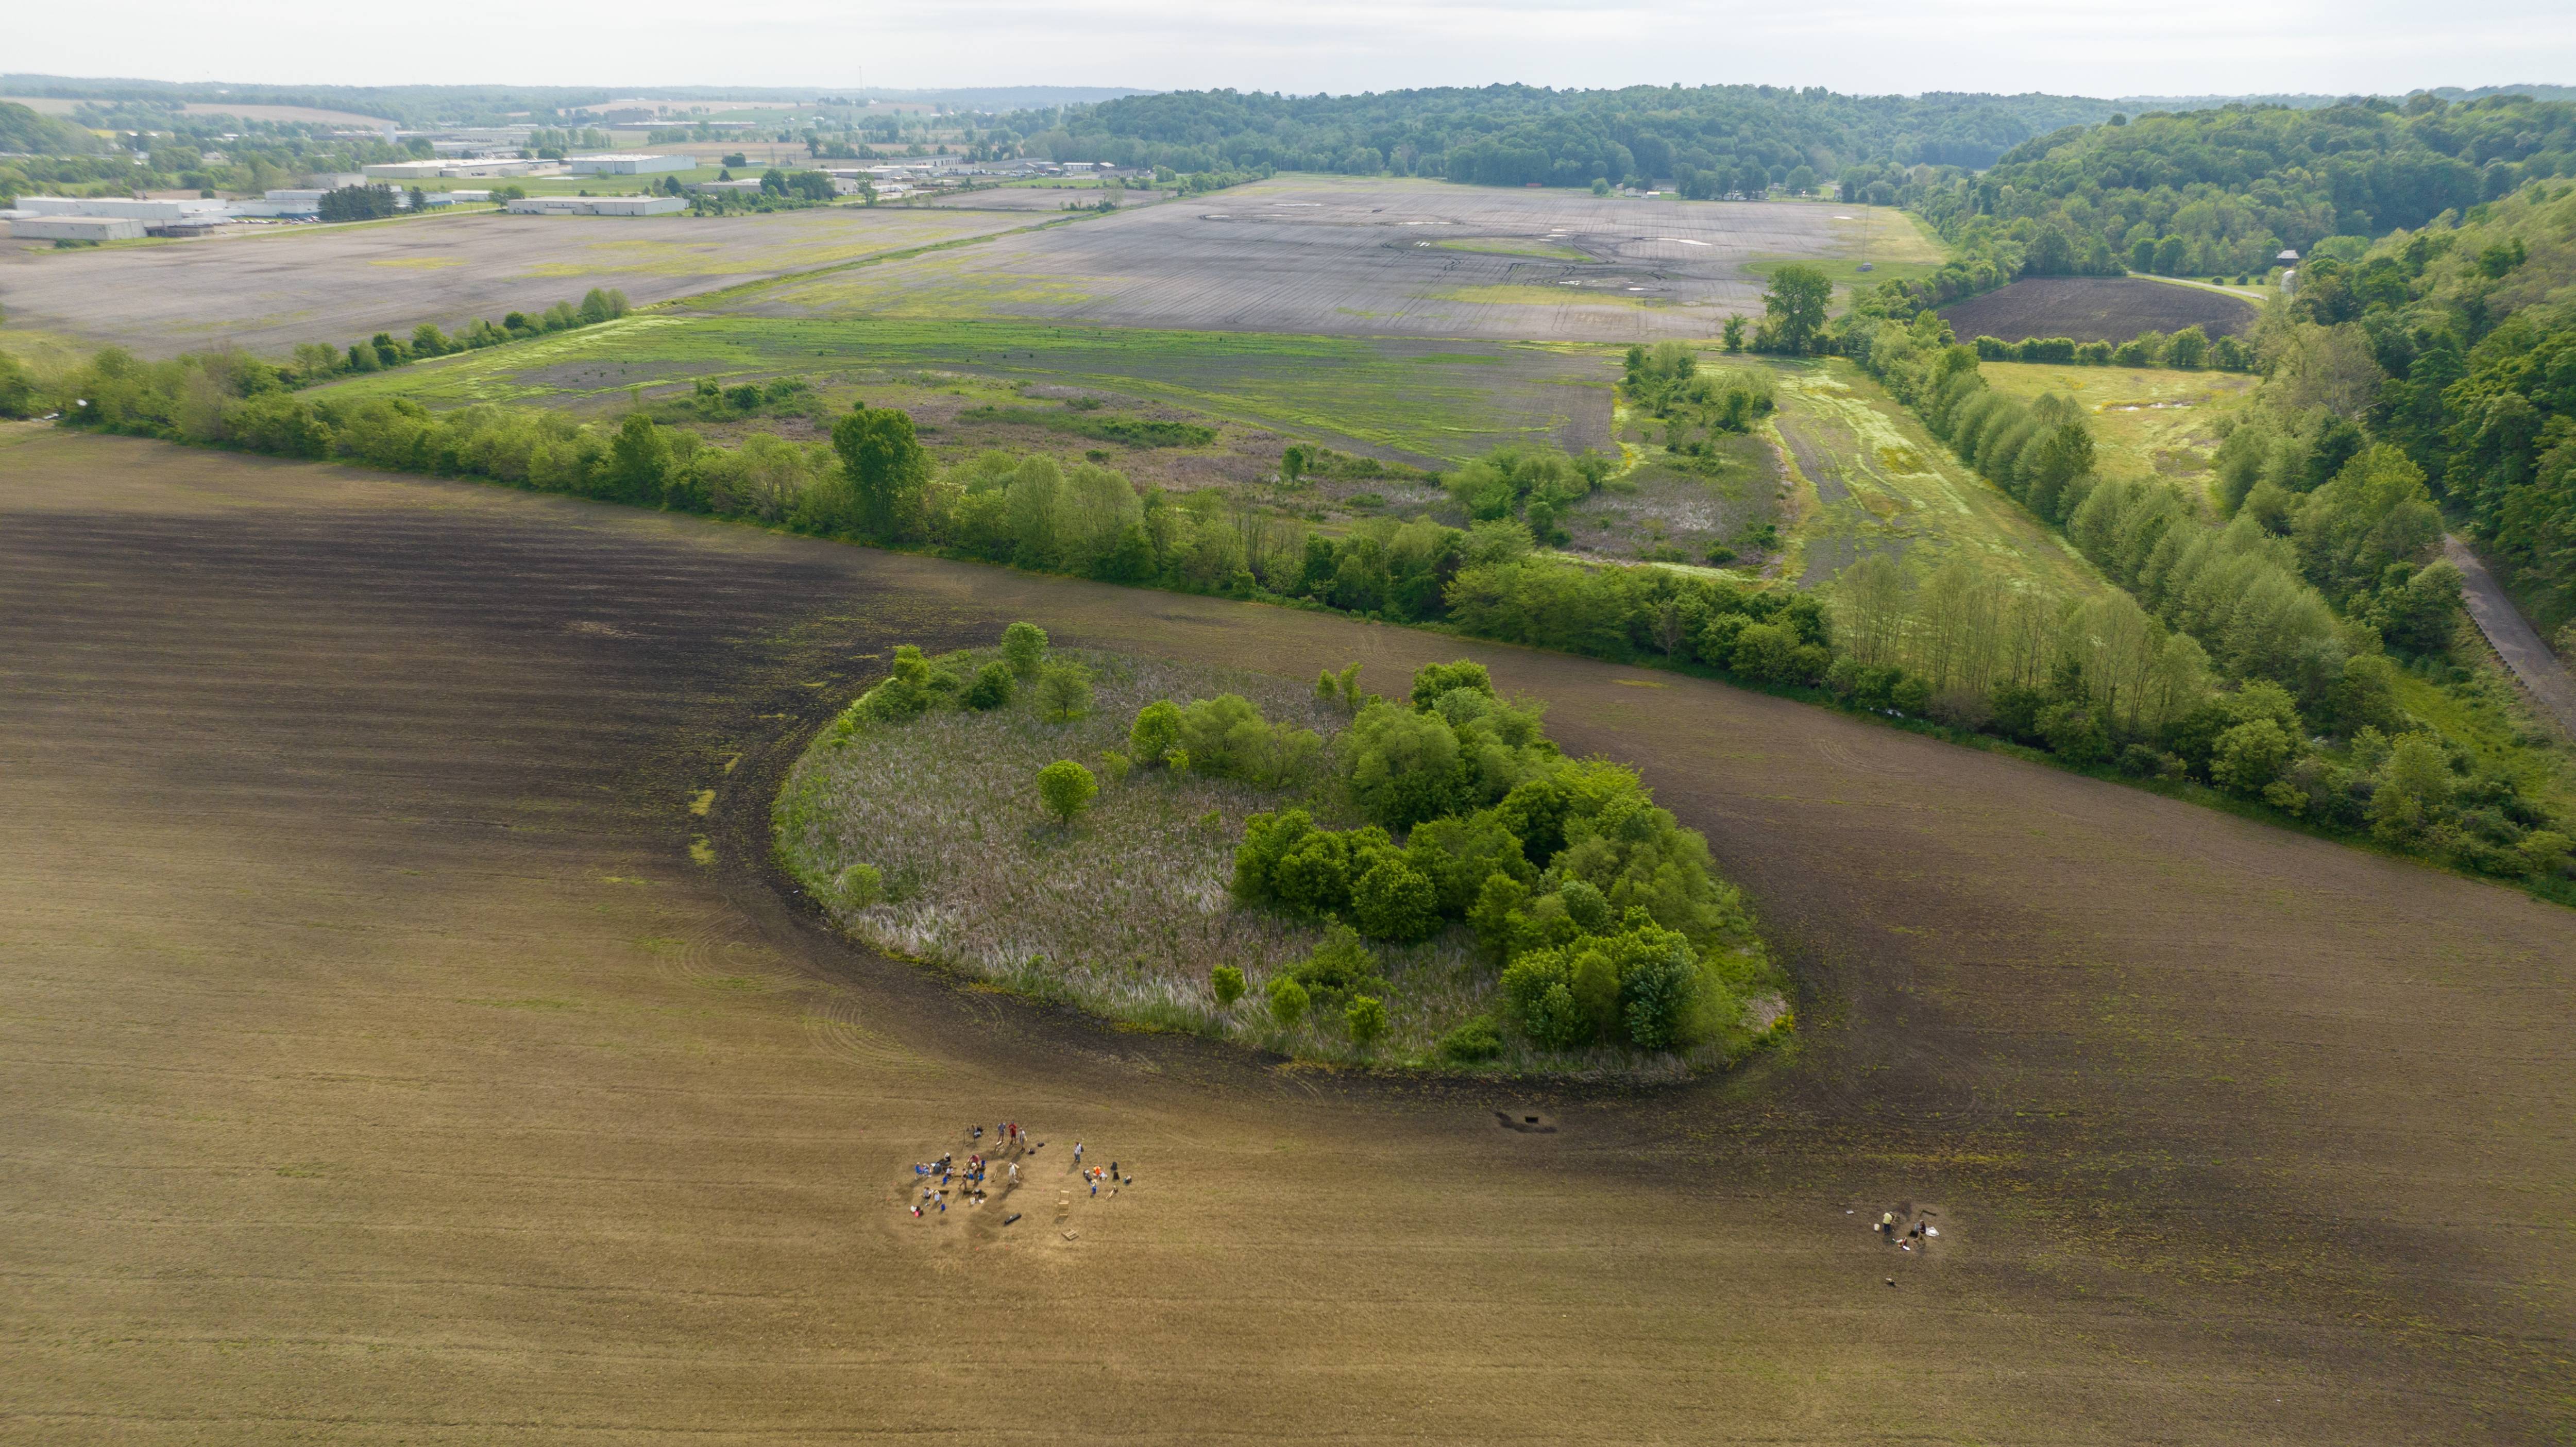 The 2023 field school investigates a 13,000-year-old site near ancient wetlands in Ohio.